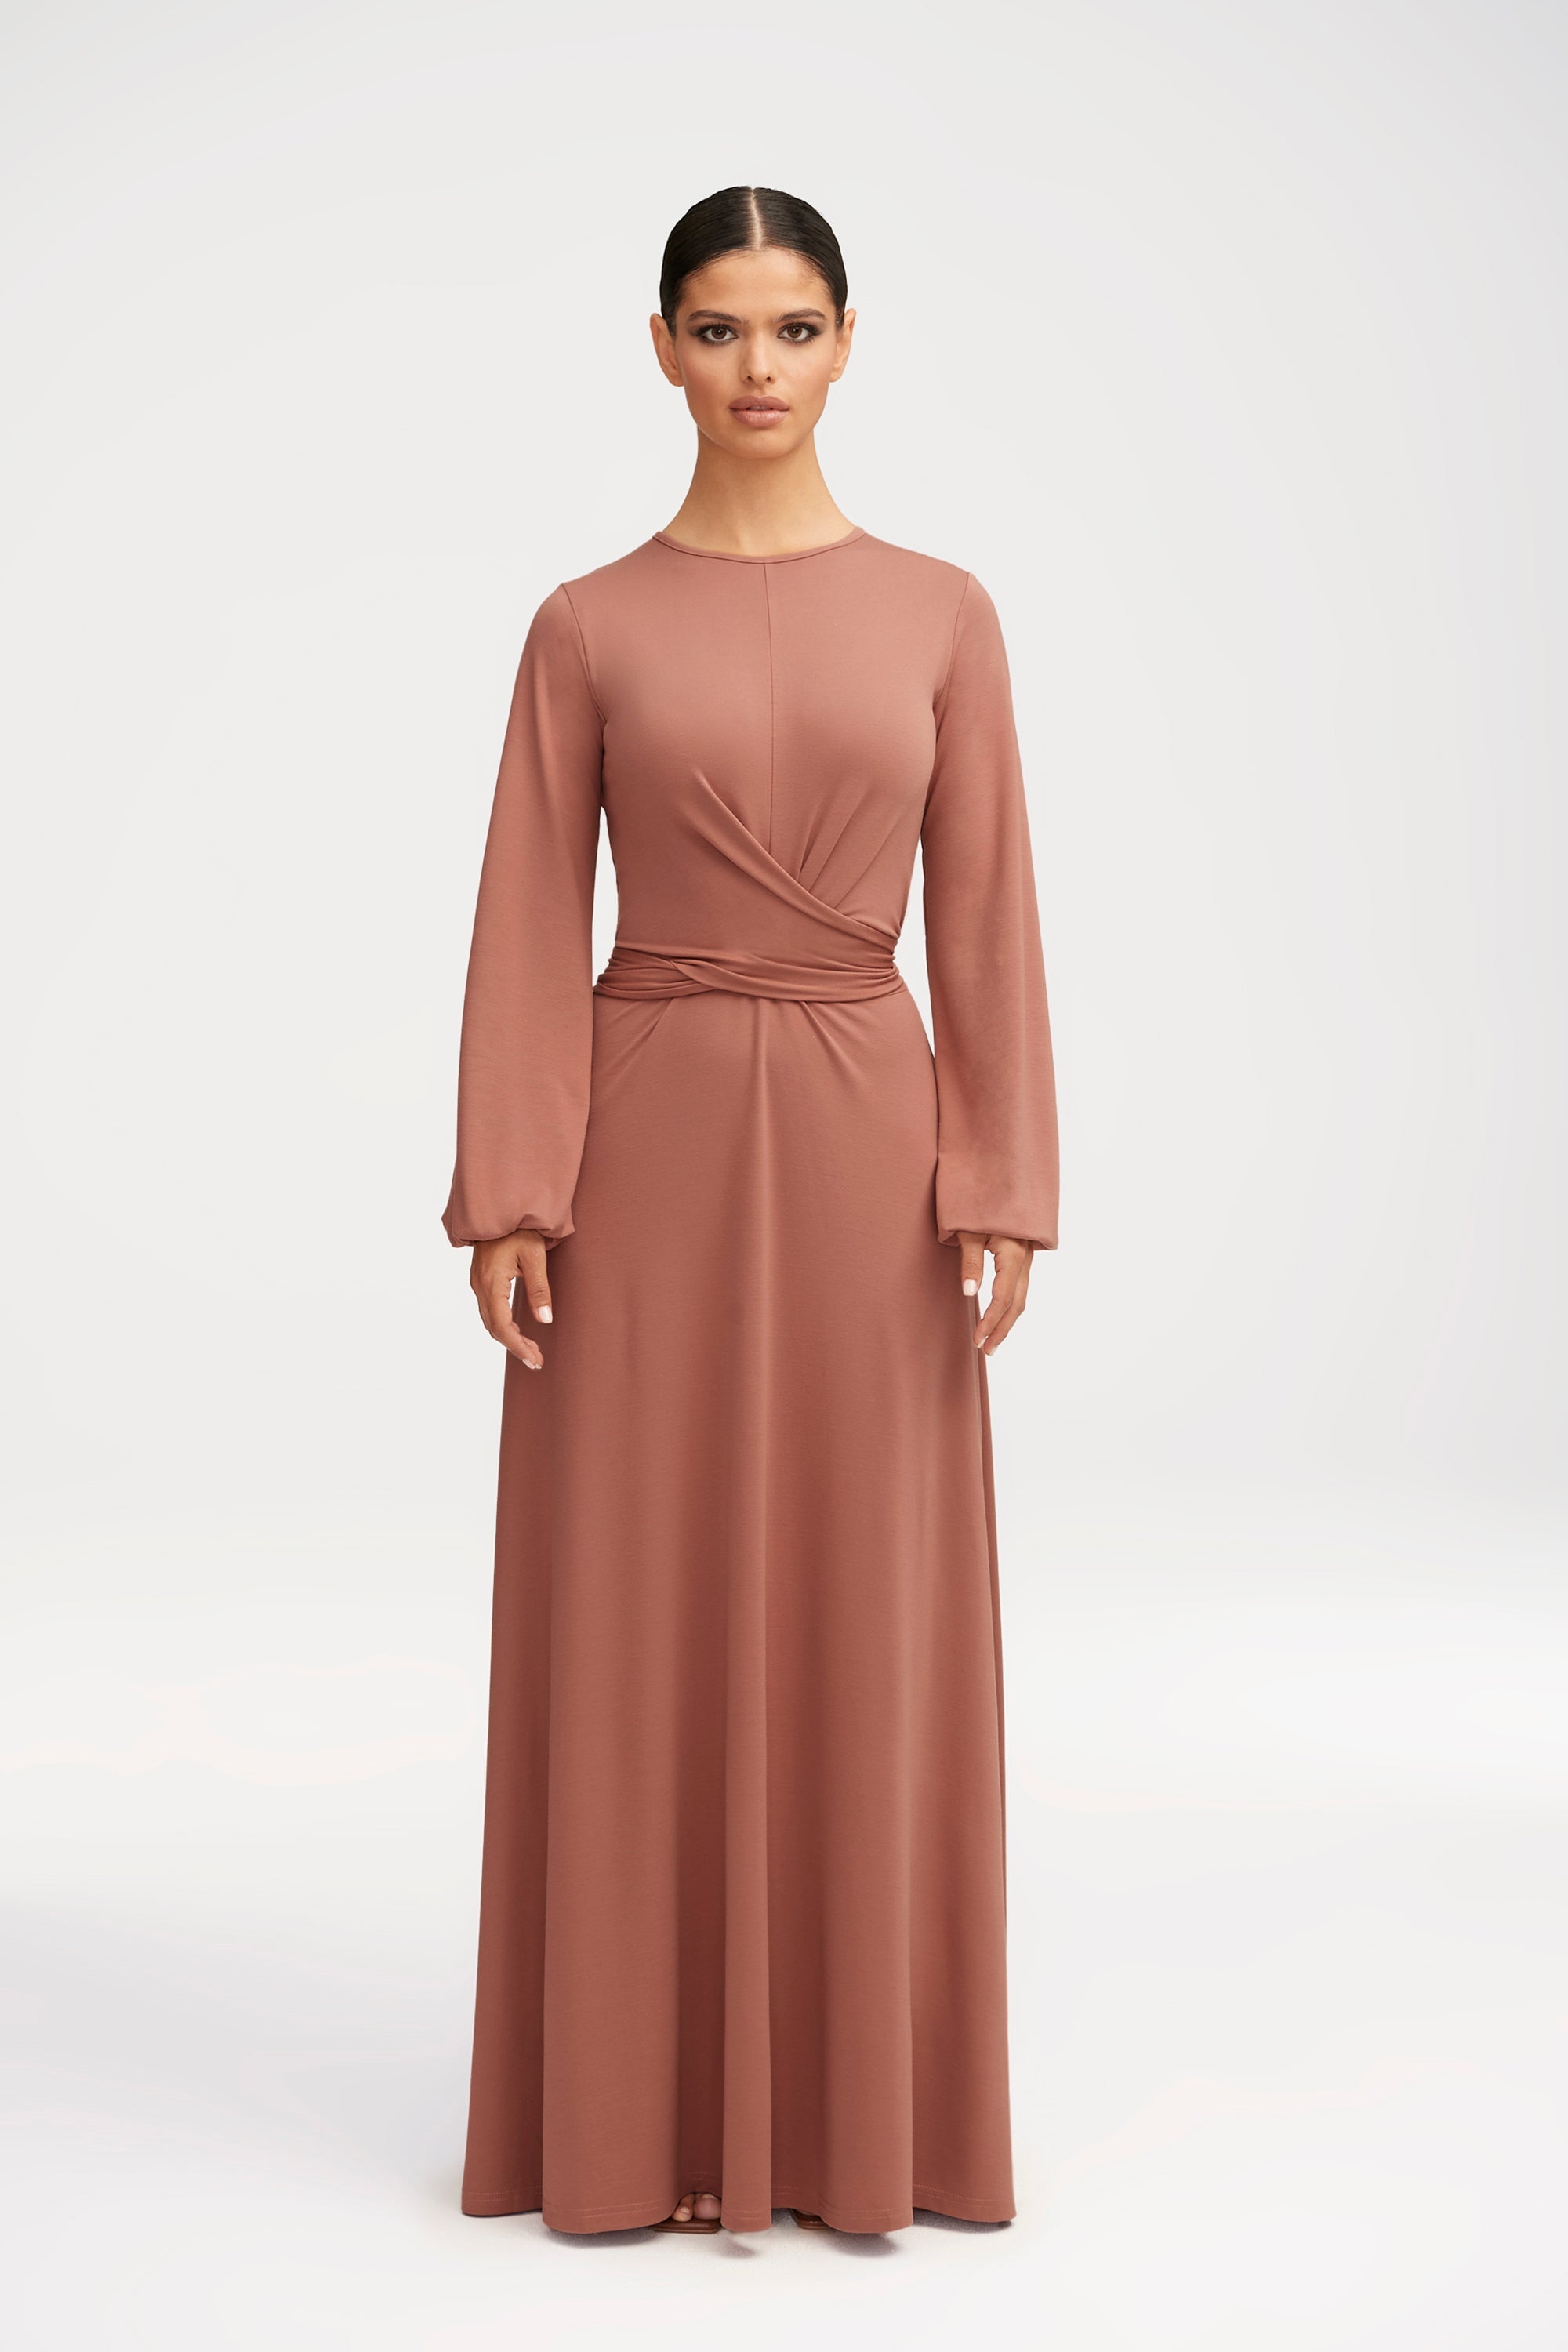 Chloé + Atelier Jolie Scalloped Hammered Silk-satin Maxi Dress in Natural